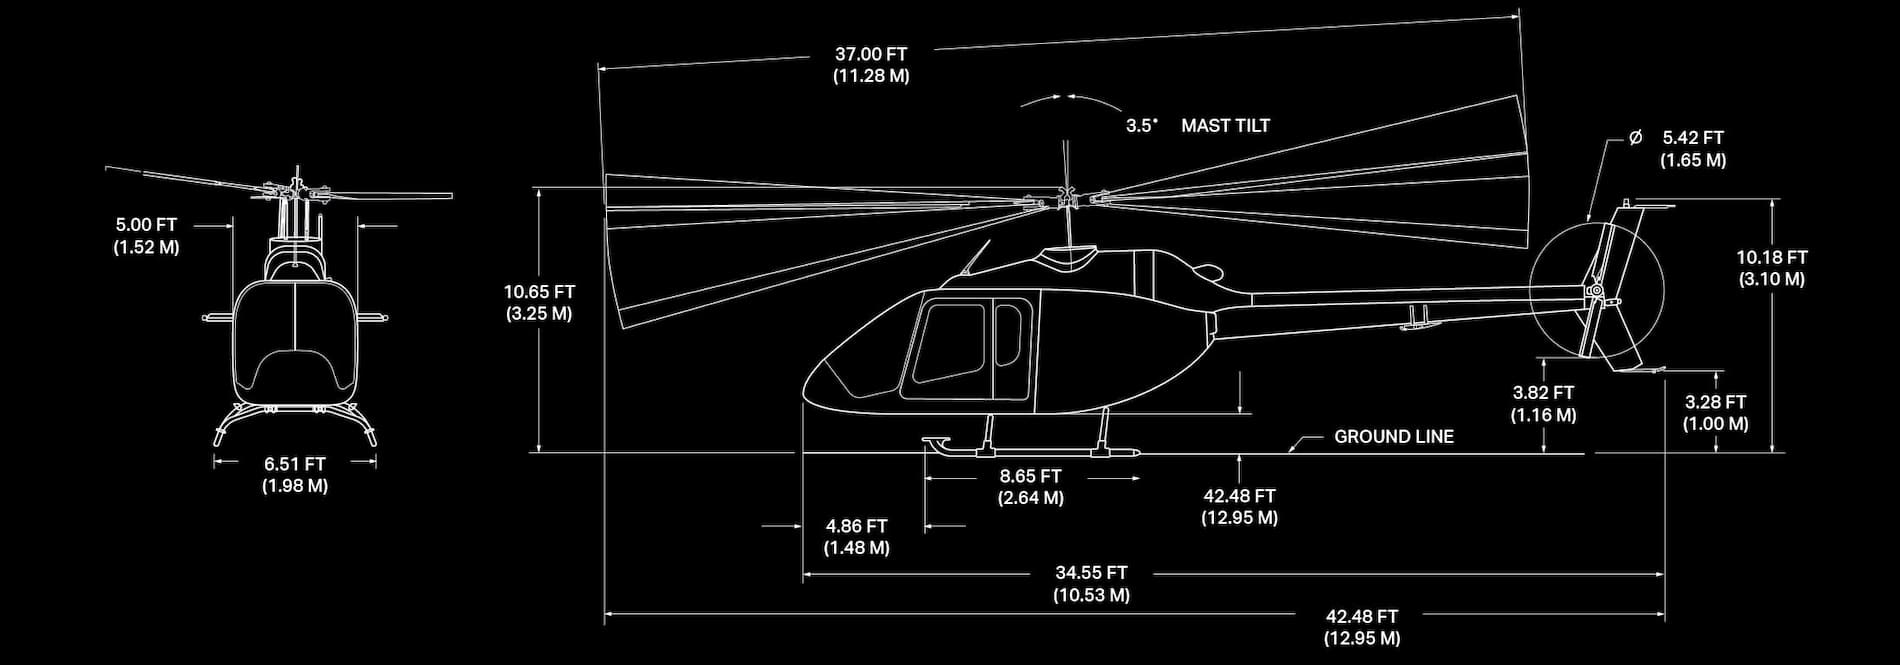 Bell 505 Specification Image